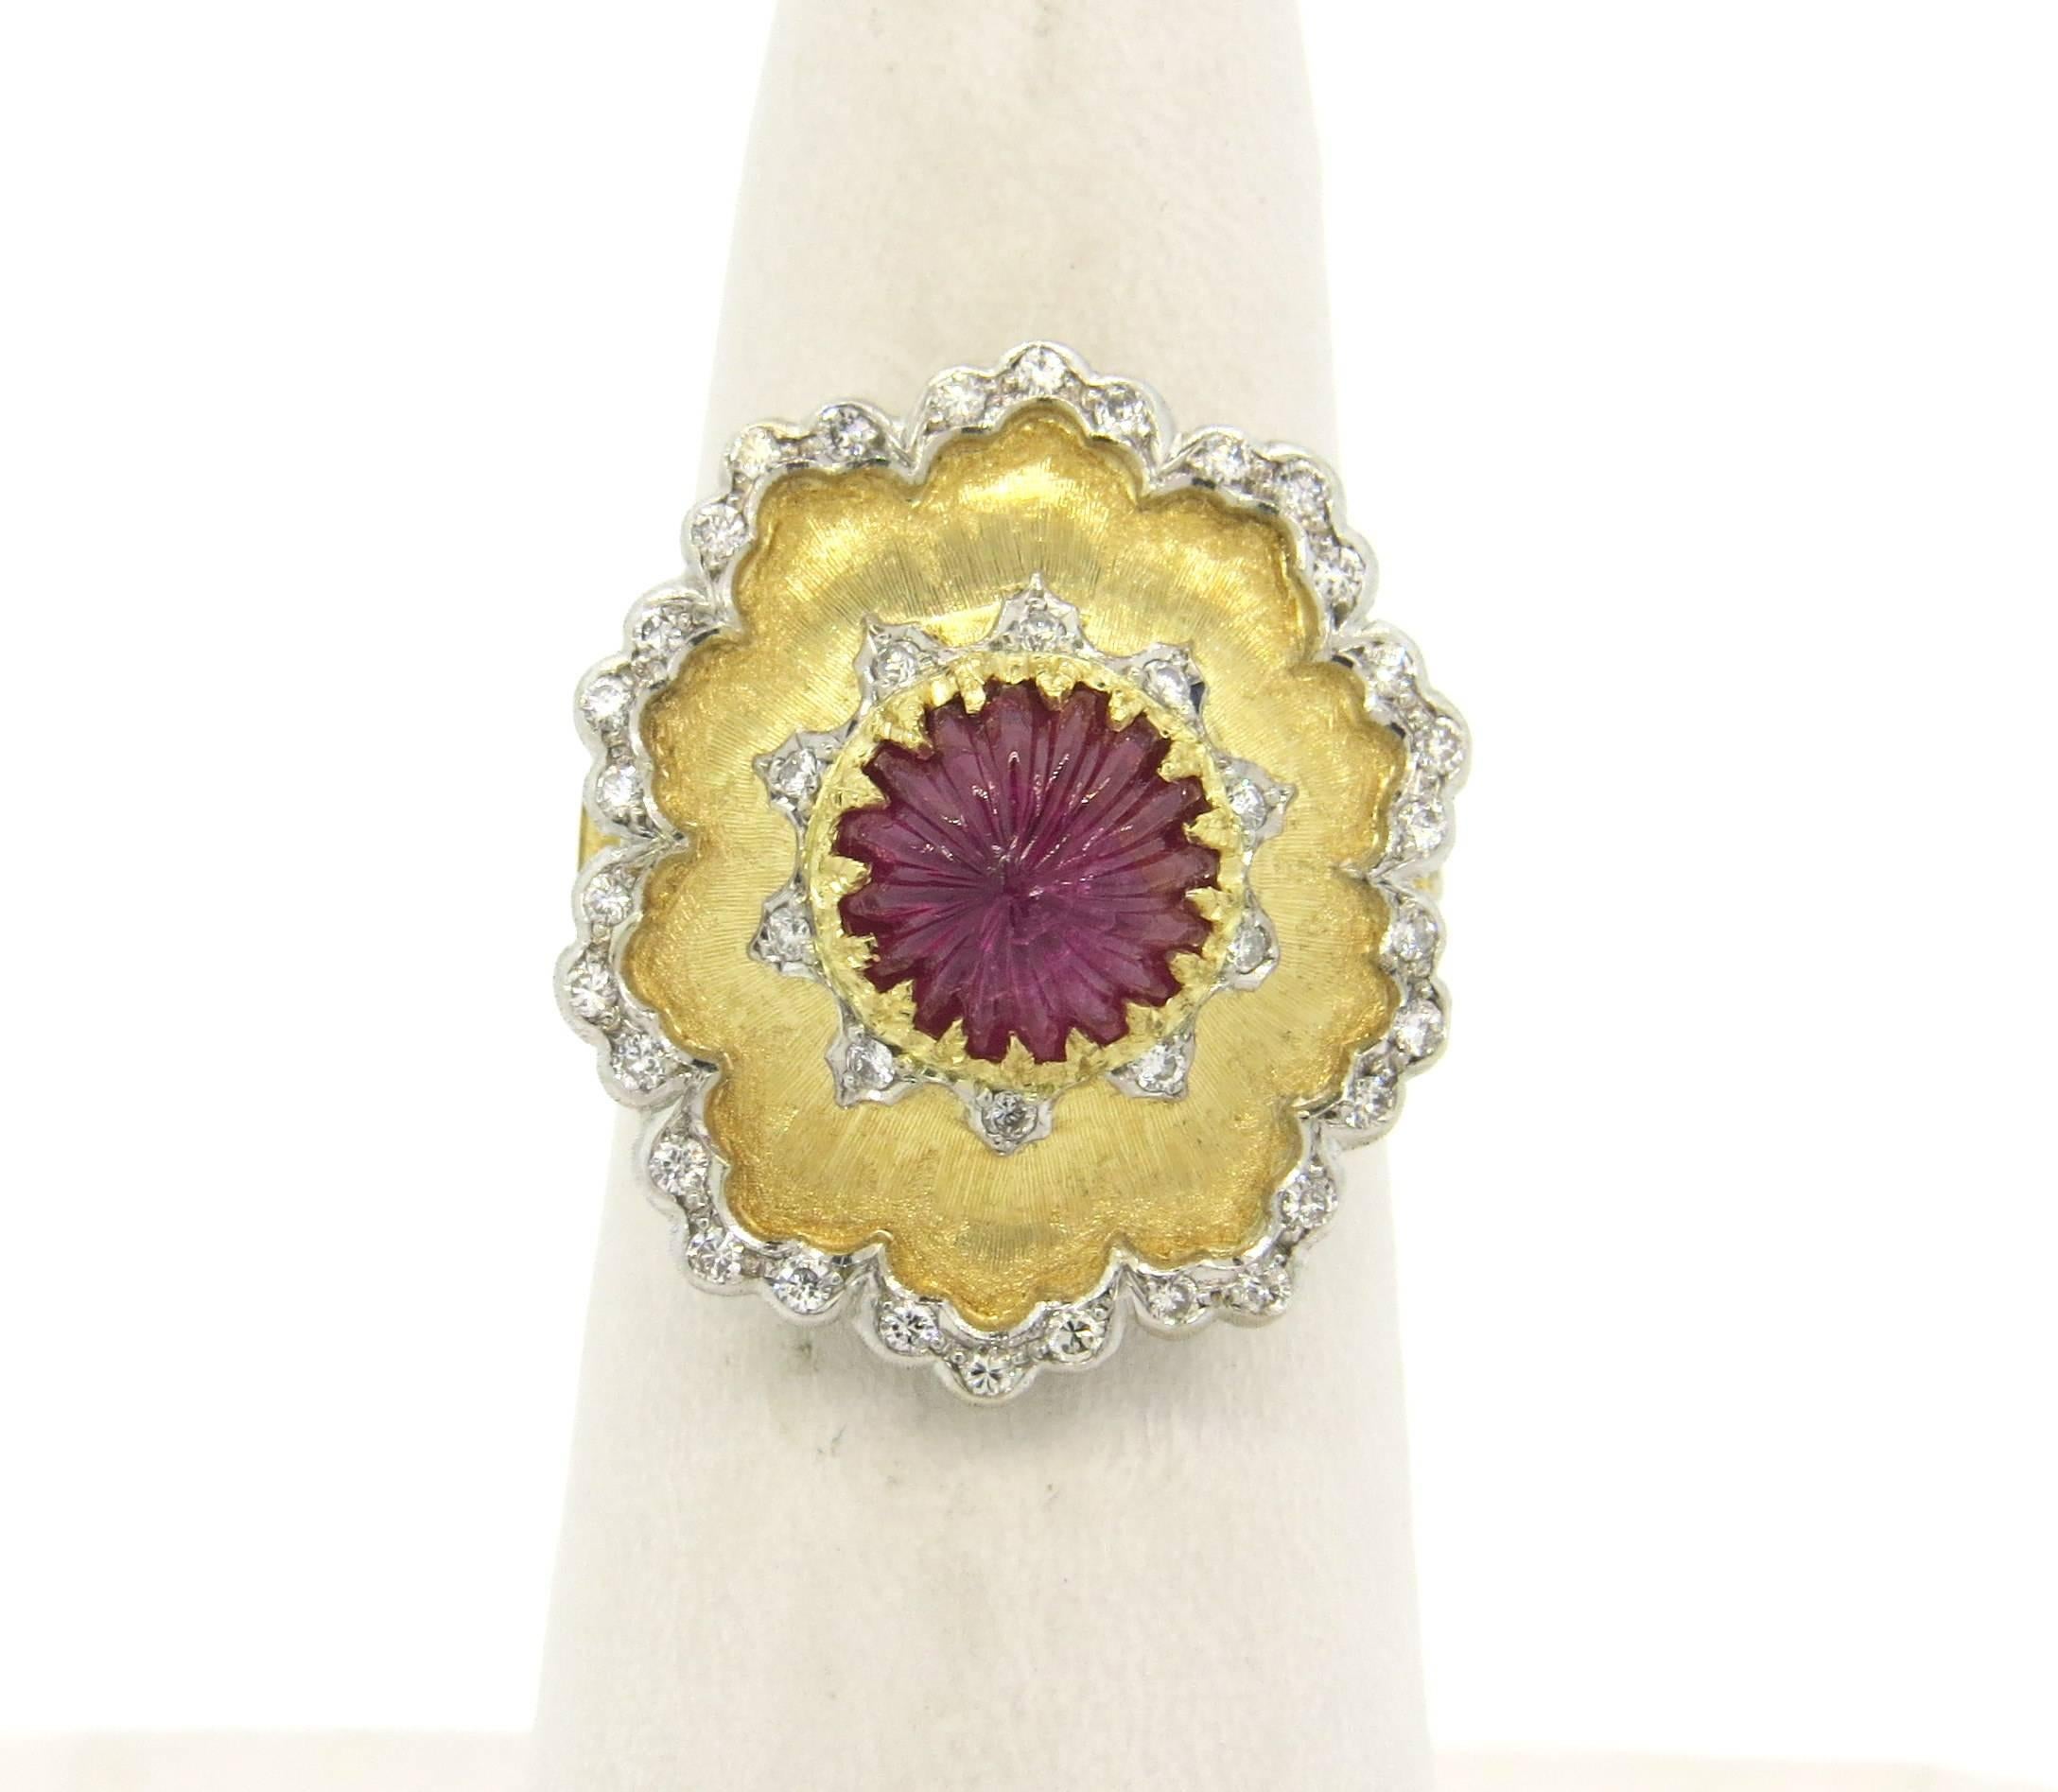 Impressive 18k yellow ans white gold ring, crafted by Buccellati, set with carved ruby in the center, surrounded with diamonds. Ring size 6, ring top 21mm x 19mm  . Marked : Buccellati, Italy 18k . Weight of the piece - 10.7 grams 